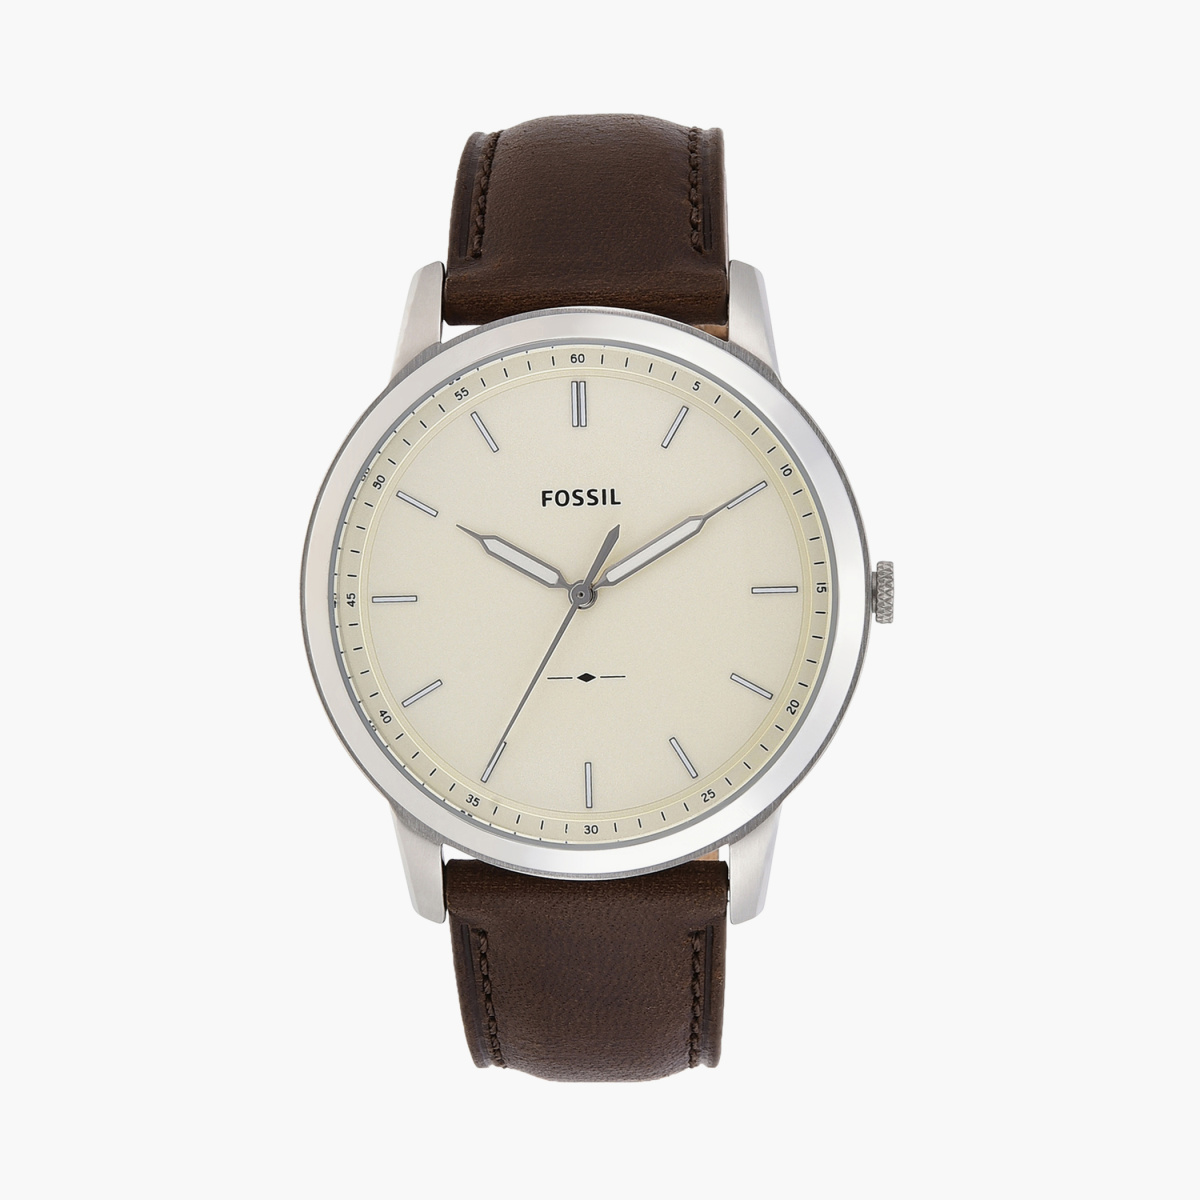 FOSSIL Men Analog Watch with Leather Strap - FS5439